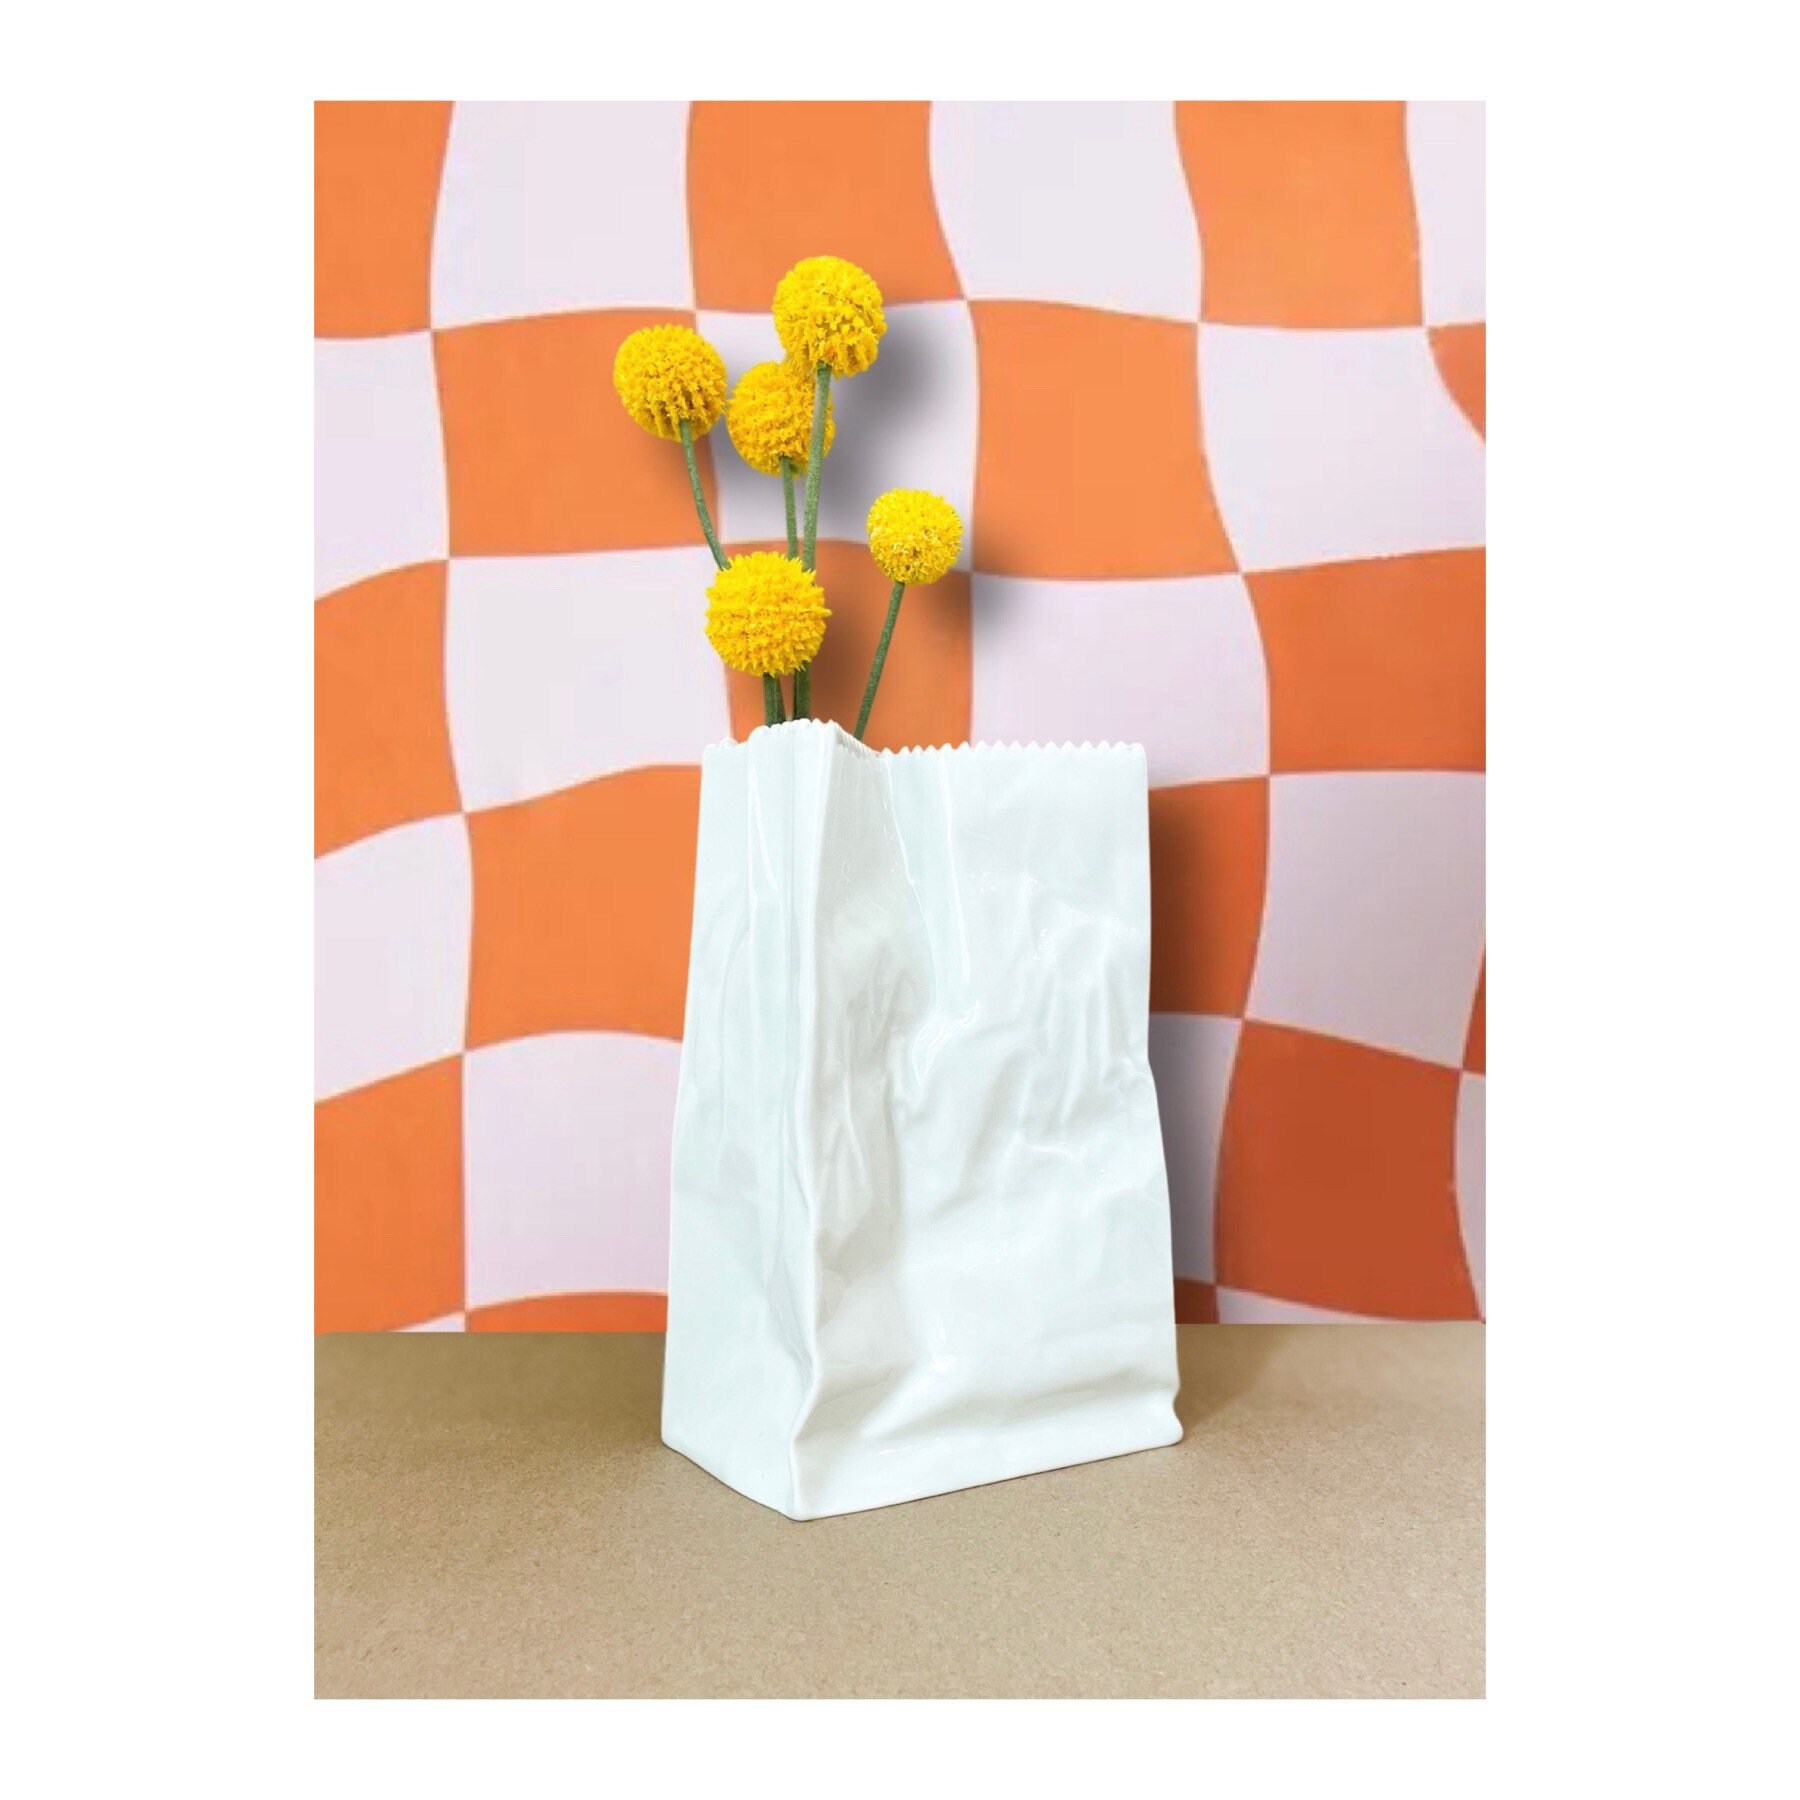 White Paper Bags Handles, Gift Bags Gift Bags, Clothes Shoes Bag